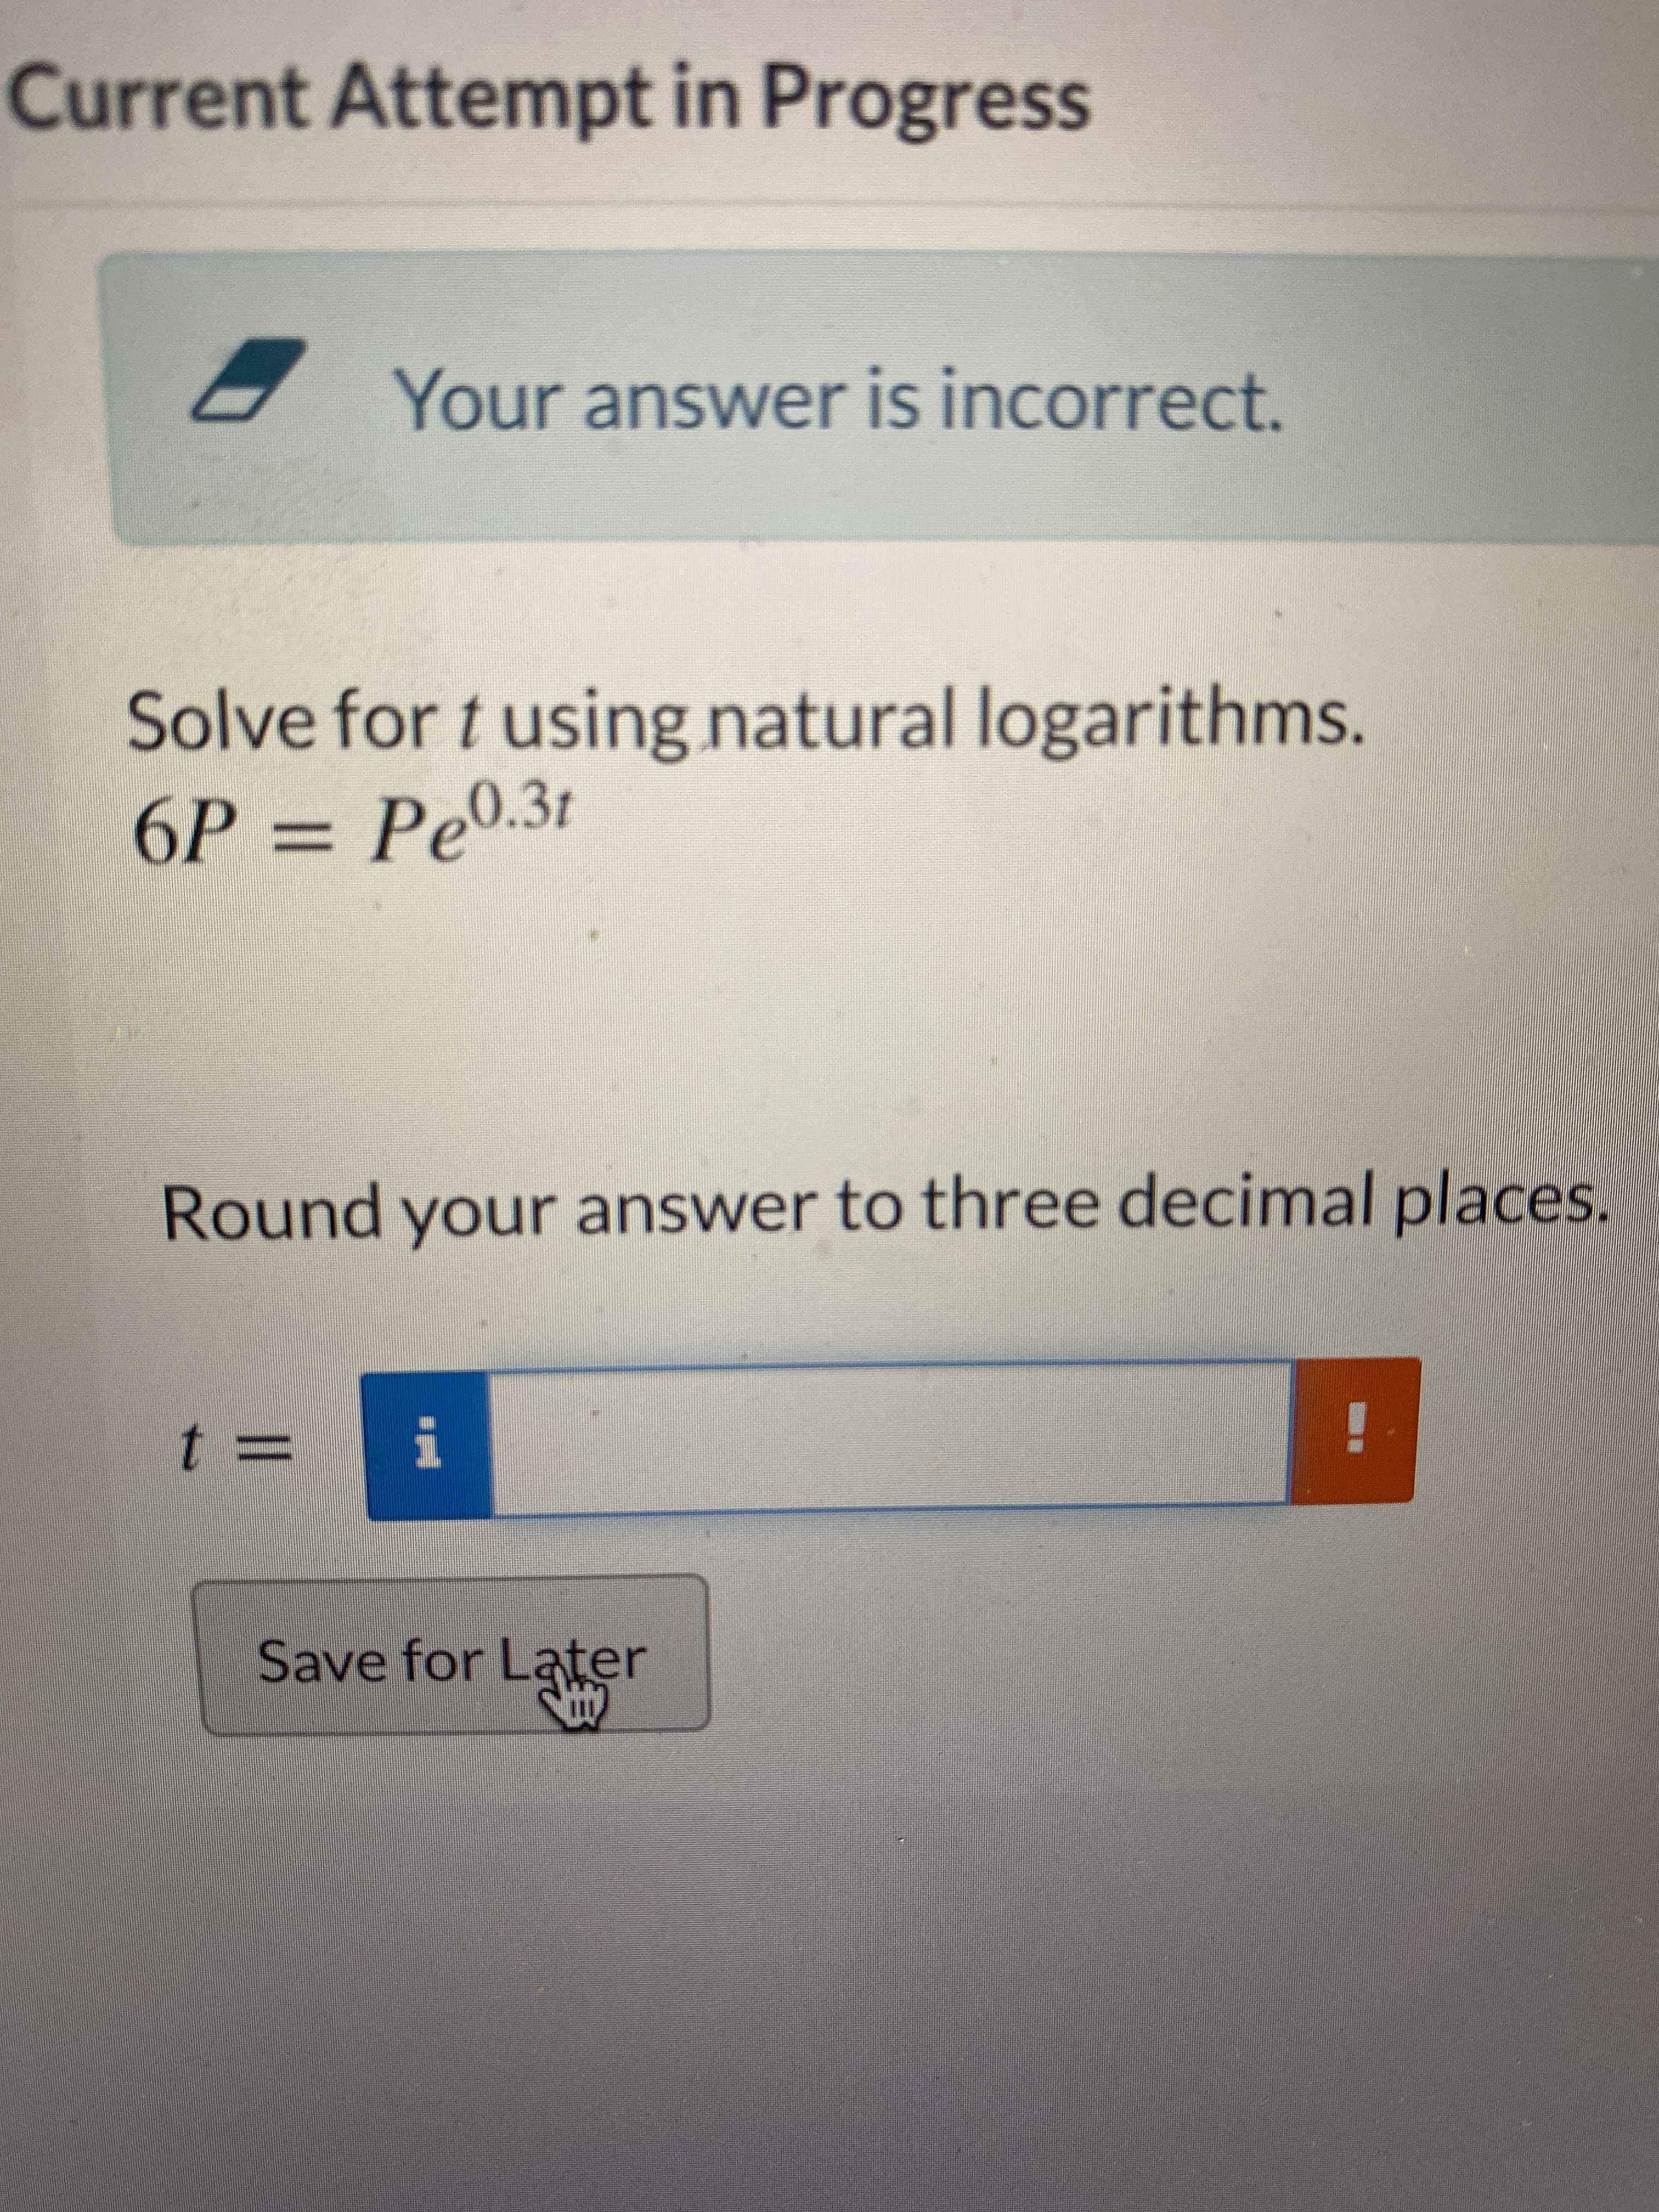 Current Attempt in Progress
Your answer is incorrect.
Solve for t using natural logarithms.
6P = Pe0.3t
%3D
Round your answer to three decimal places.
%3D
Save for Later
